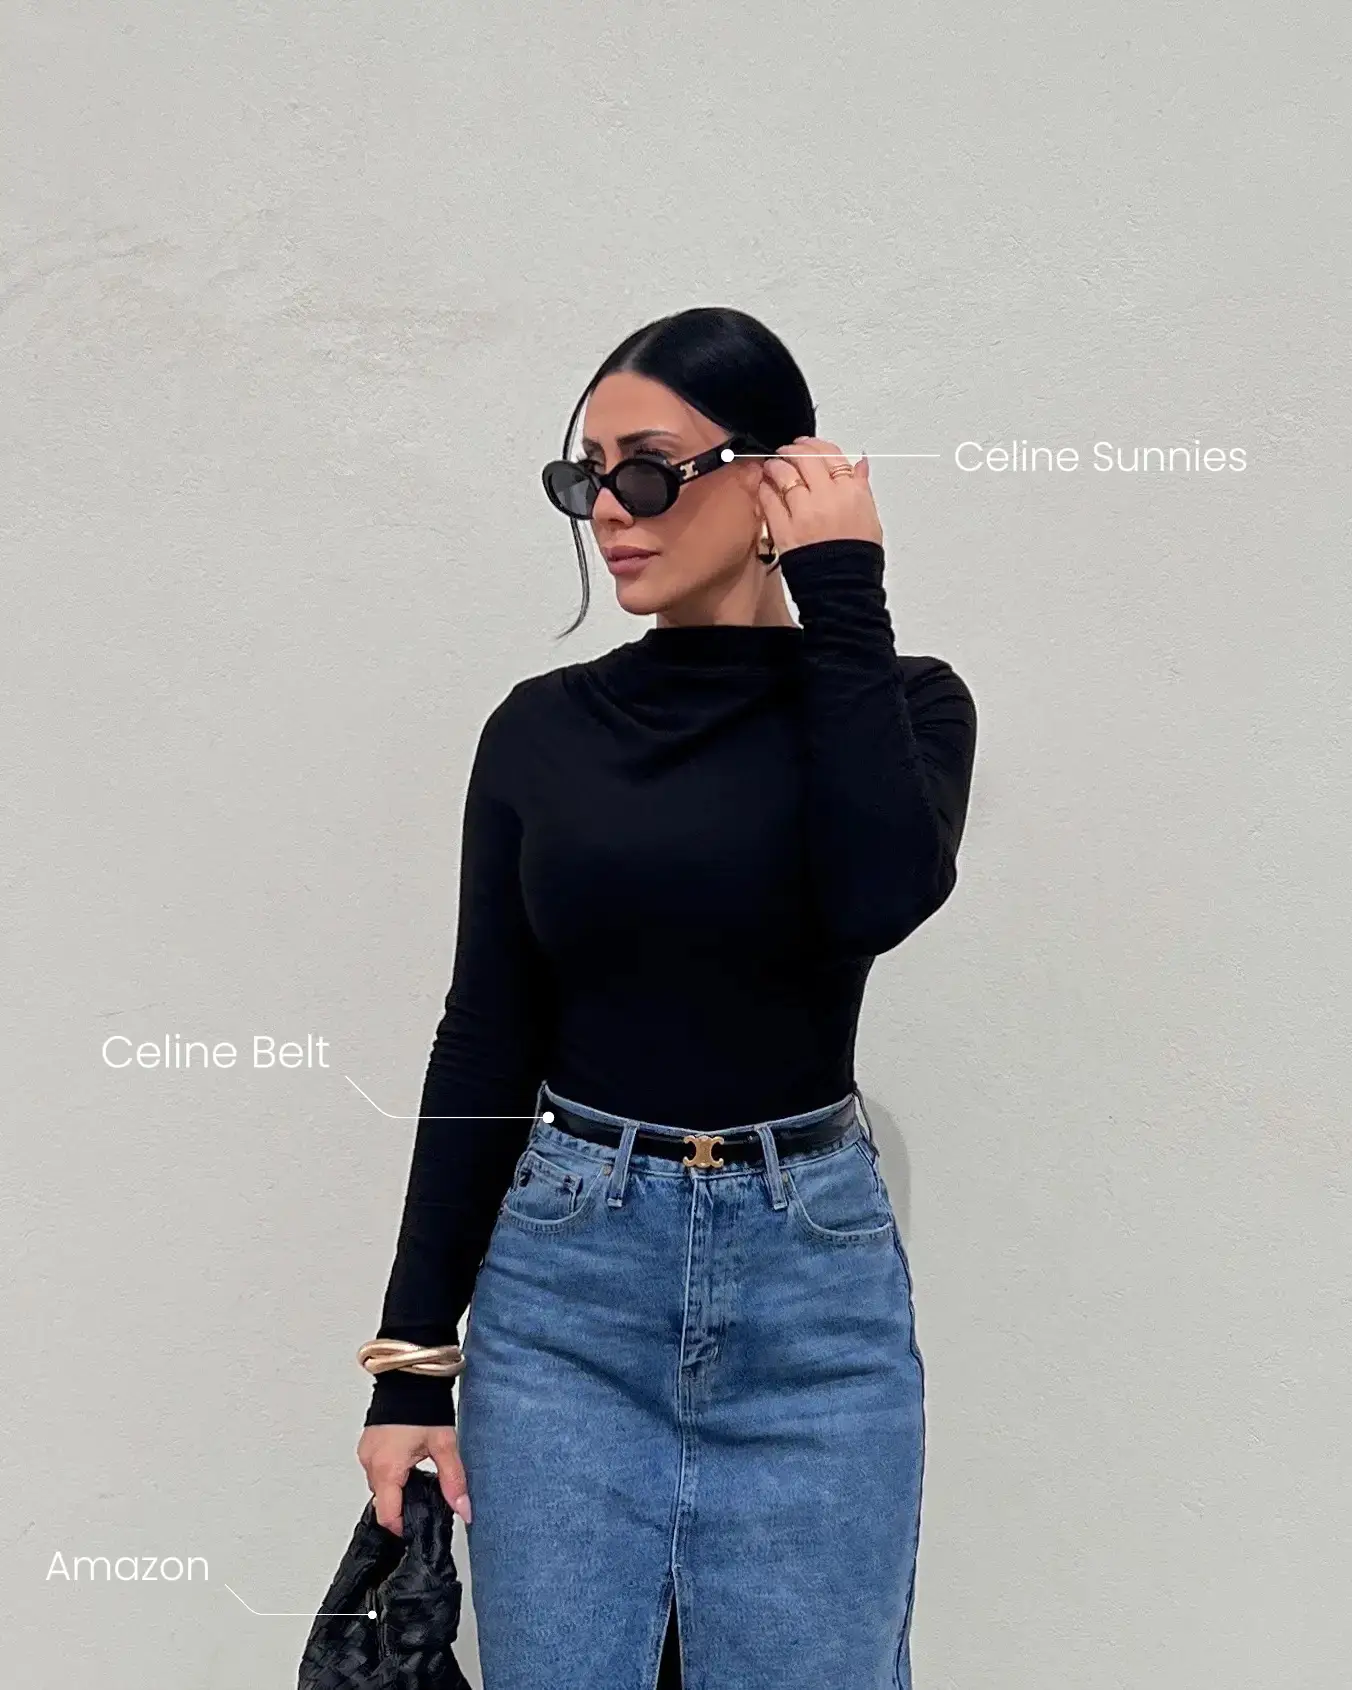 The Look For Less: Celine Belt Bag: $2,650 vs. $101 - THE BALLER ON A  BUDGET - An Affordable Fashion, Beauty & Lifestyle Blog